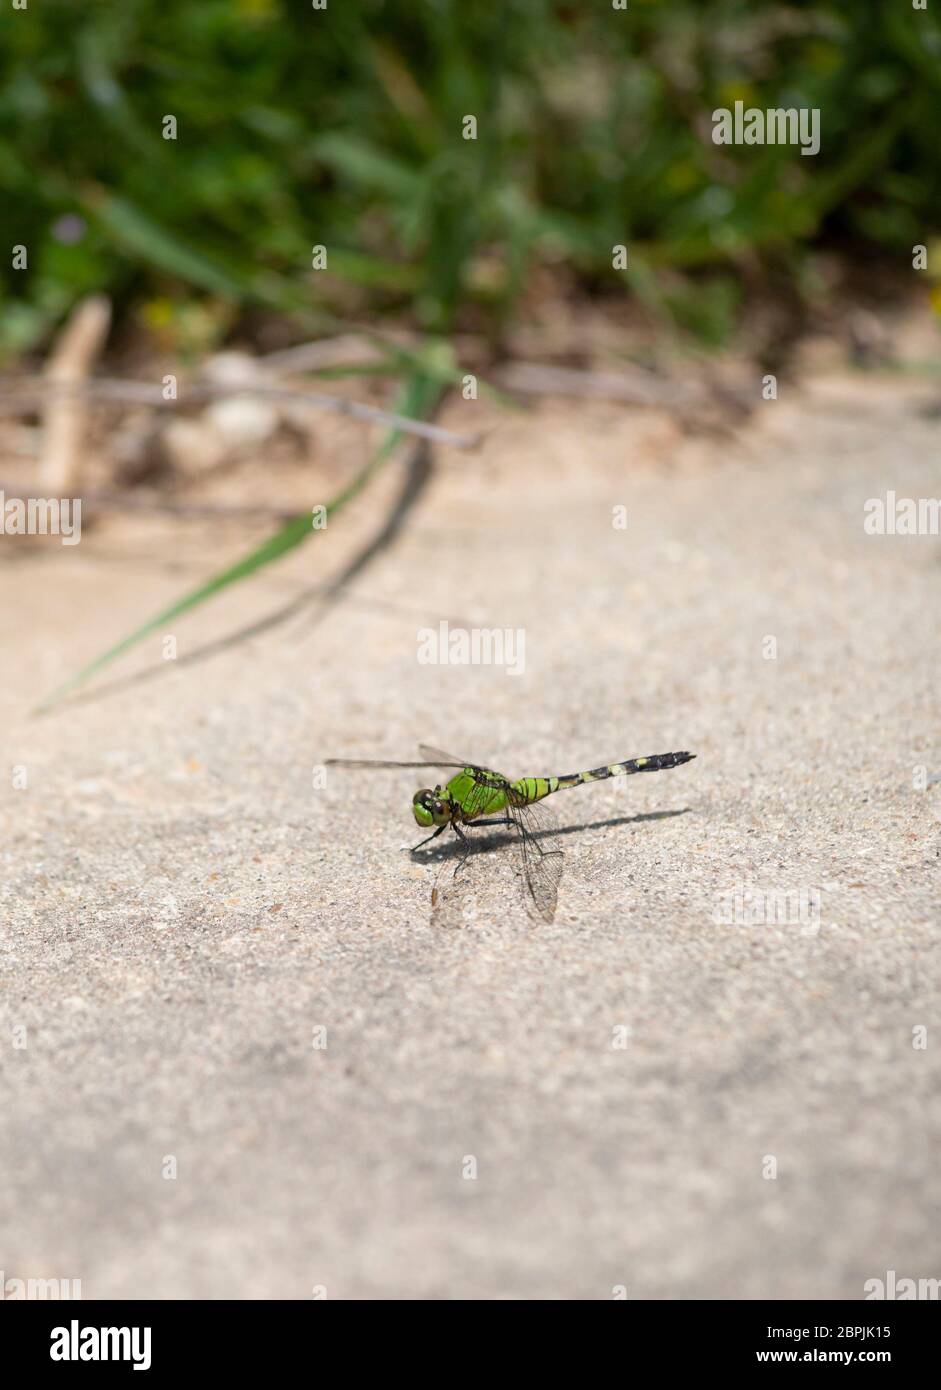 Pondhawk dragonfly that has just landed on a sidewalk Stock Photo